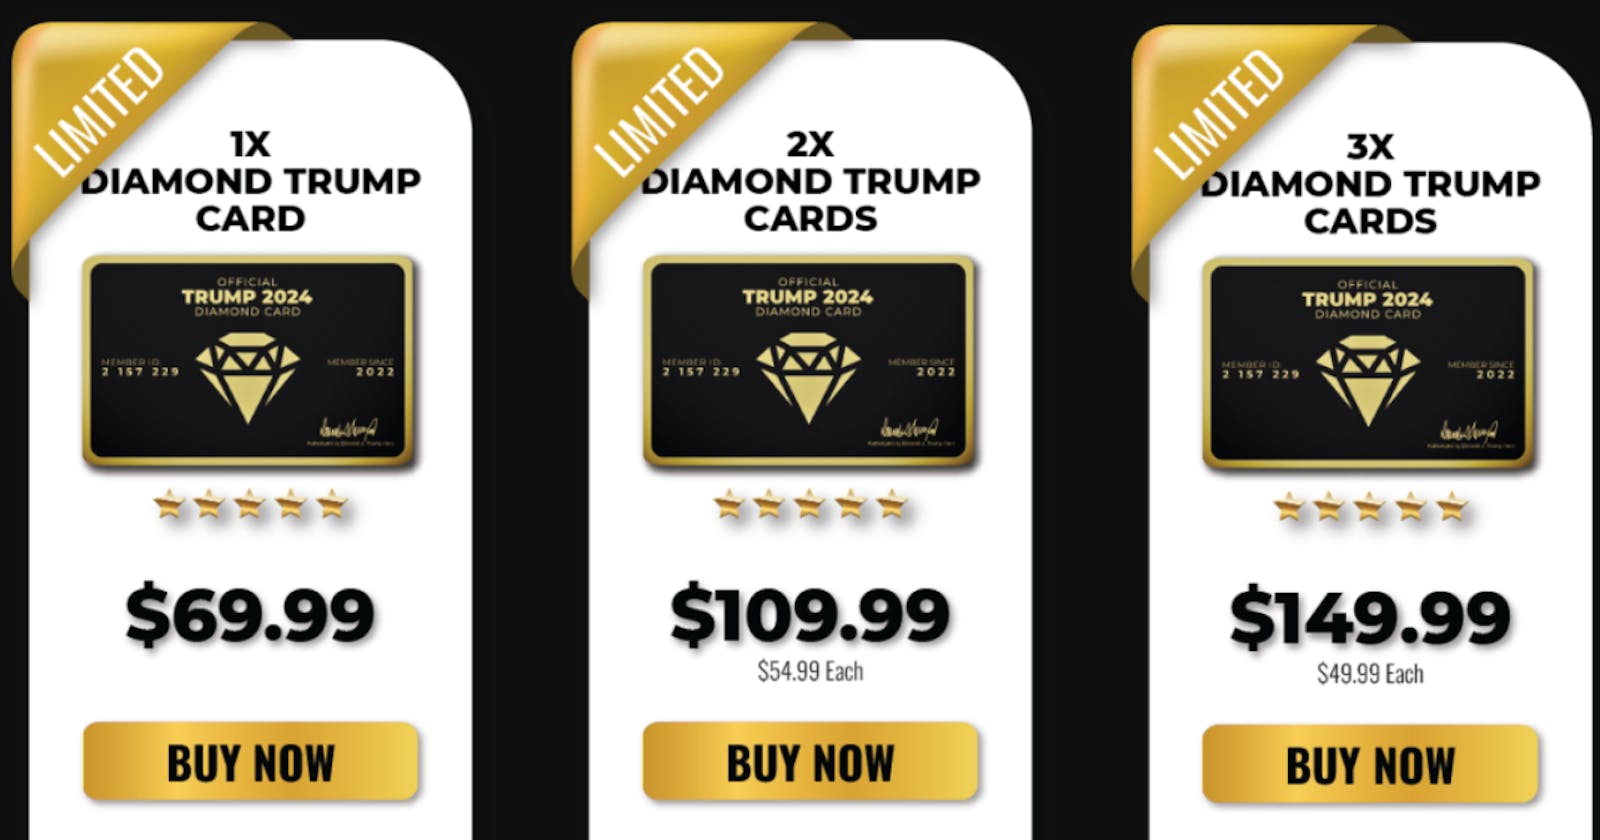 Trump 2024 Diamond Card (REAL REPORT) Do You Know The Reality Behind This Diamond Trump Card?